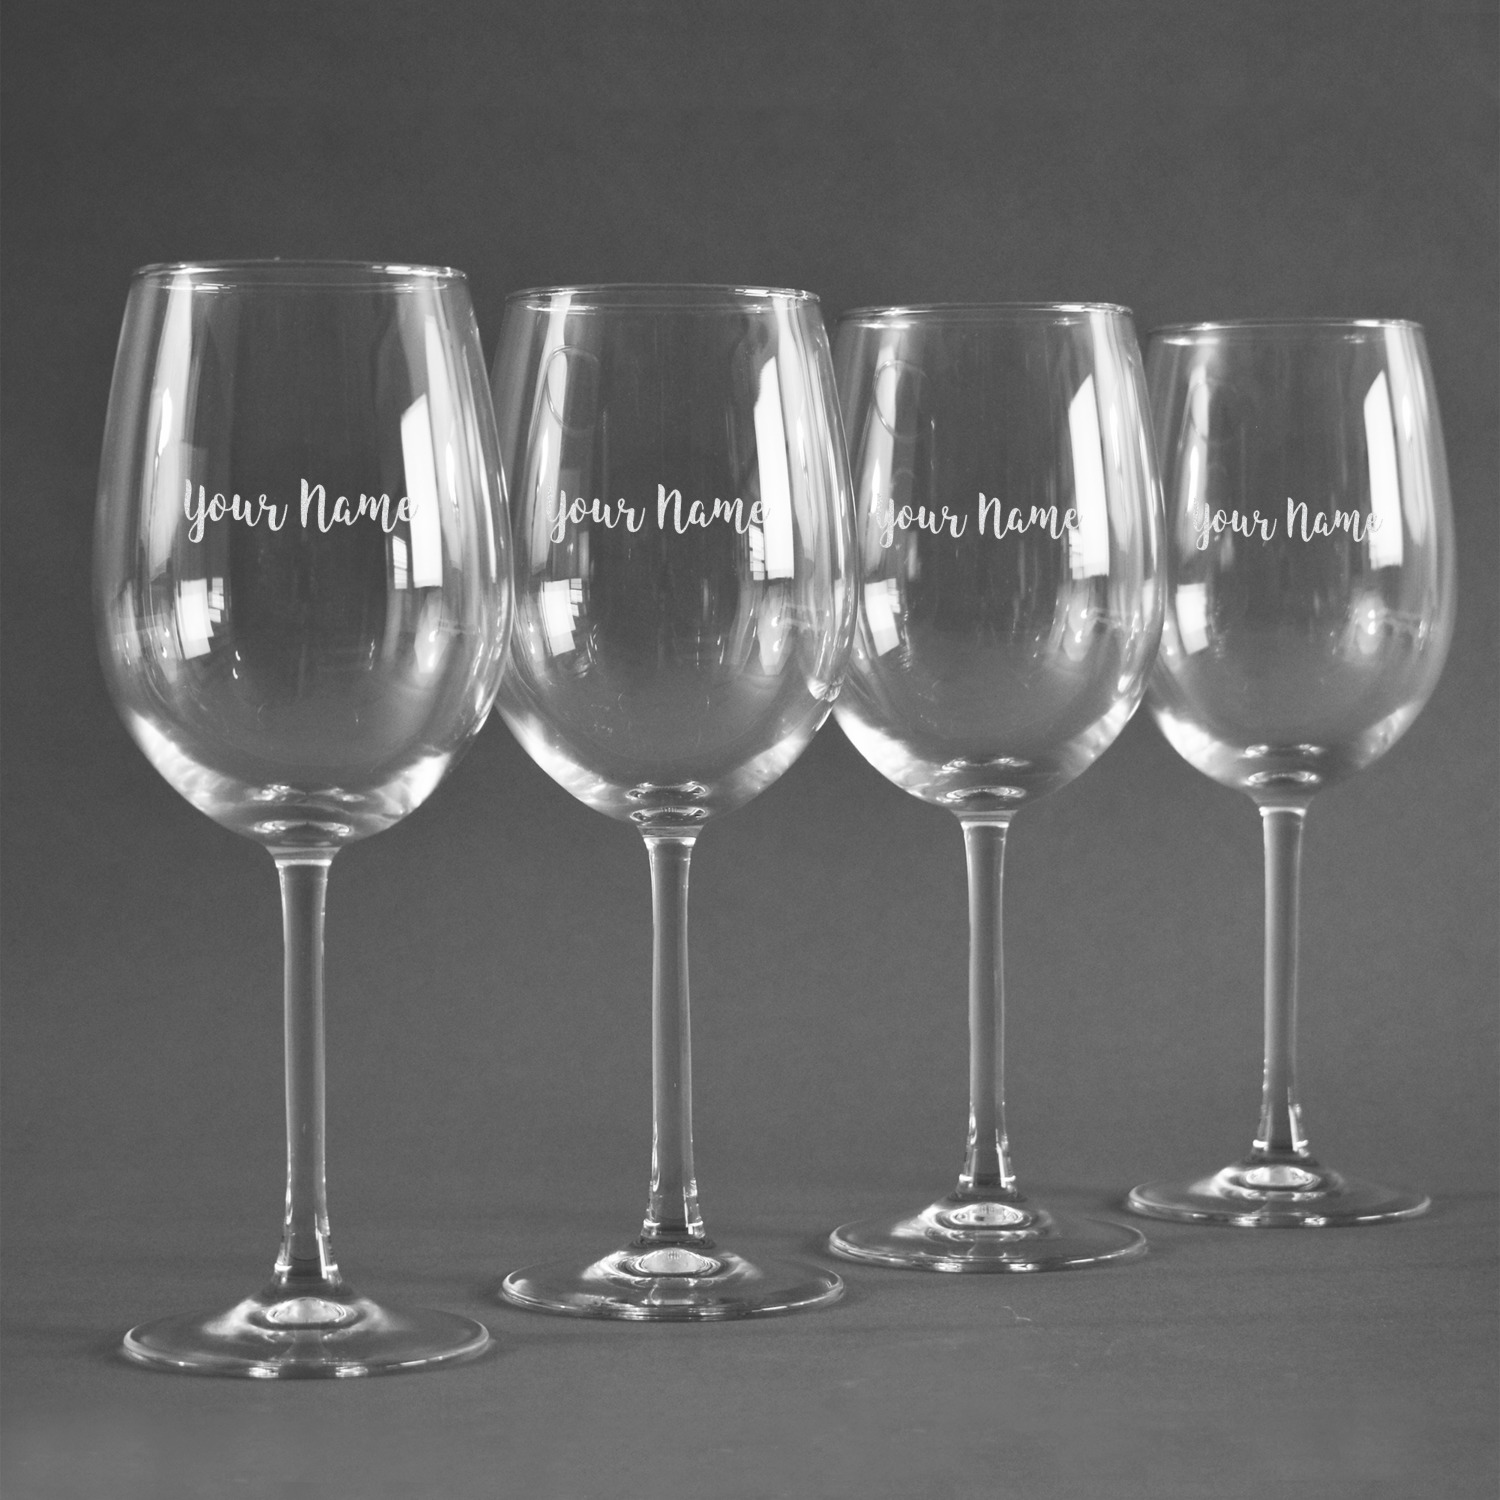 https://www.youcustomizeit.com/common/MAKE/837464/Script-Name-Personalized-Wine-Glasses-Set-of-4.jpg?lm=1690555867